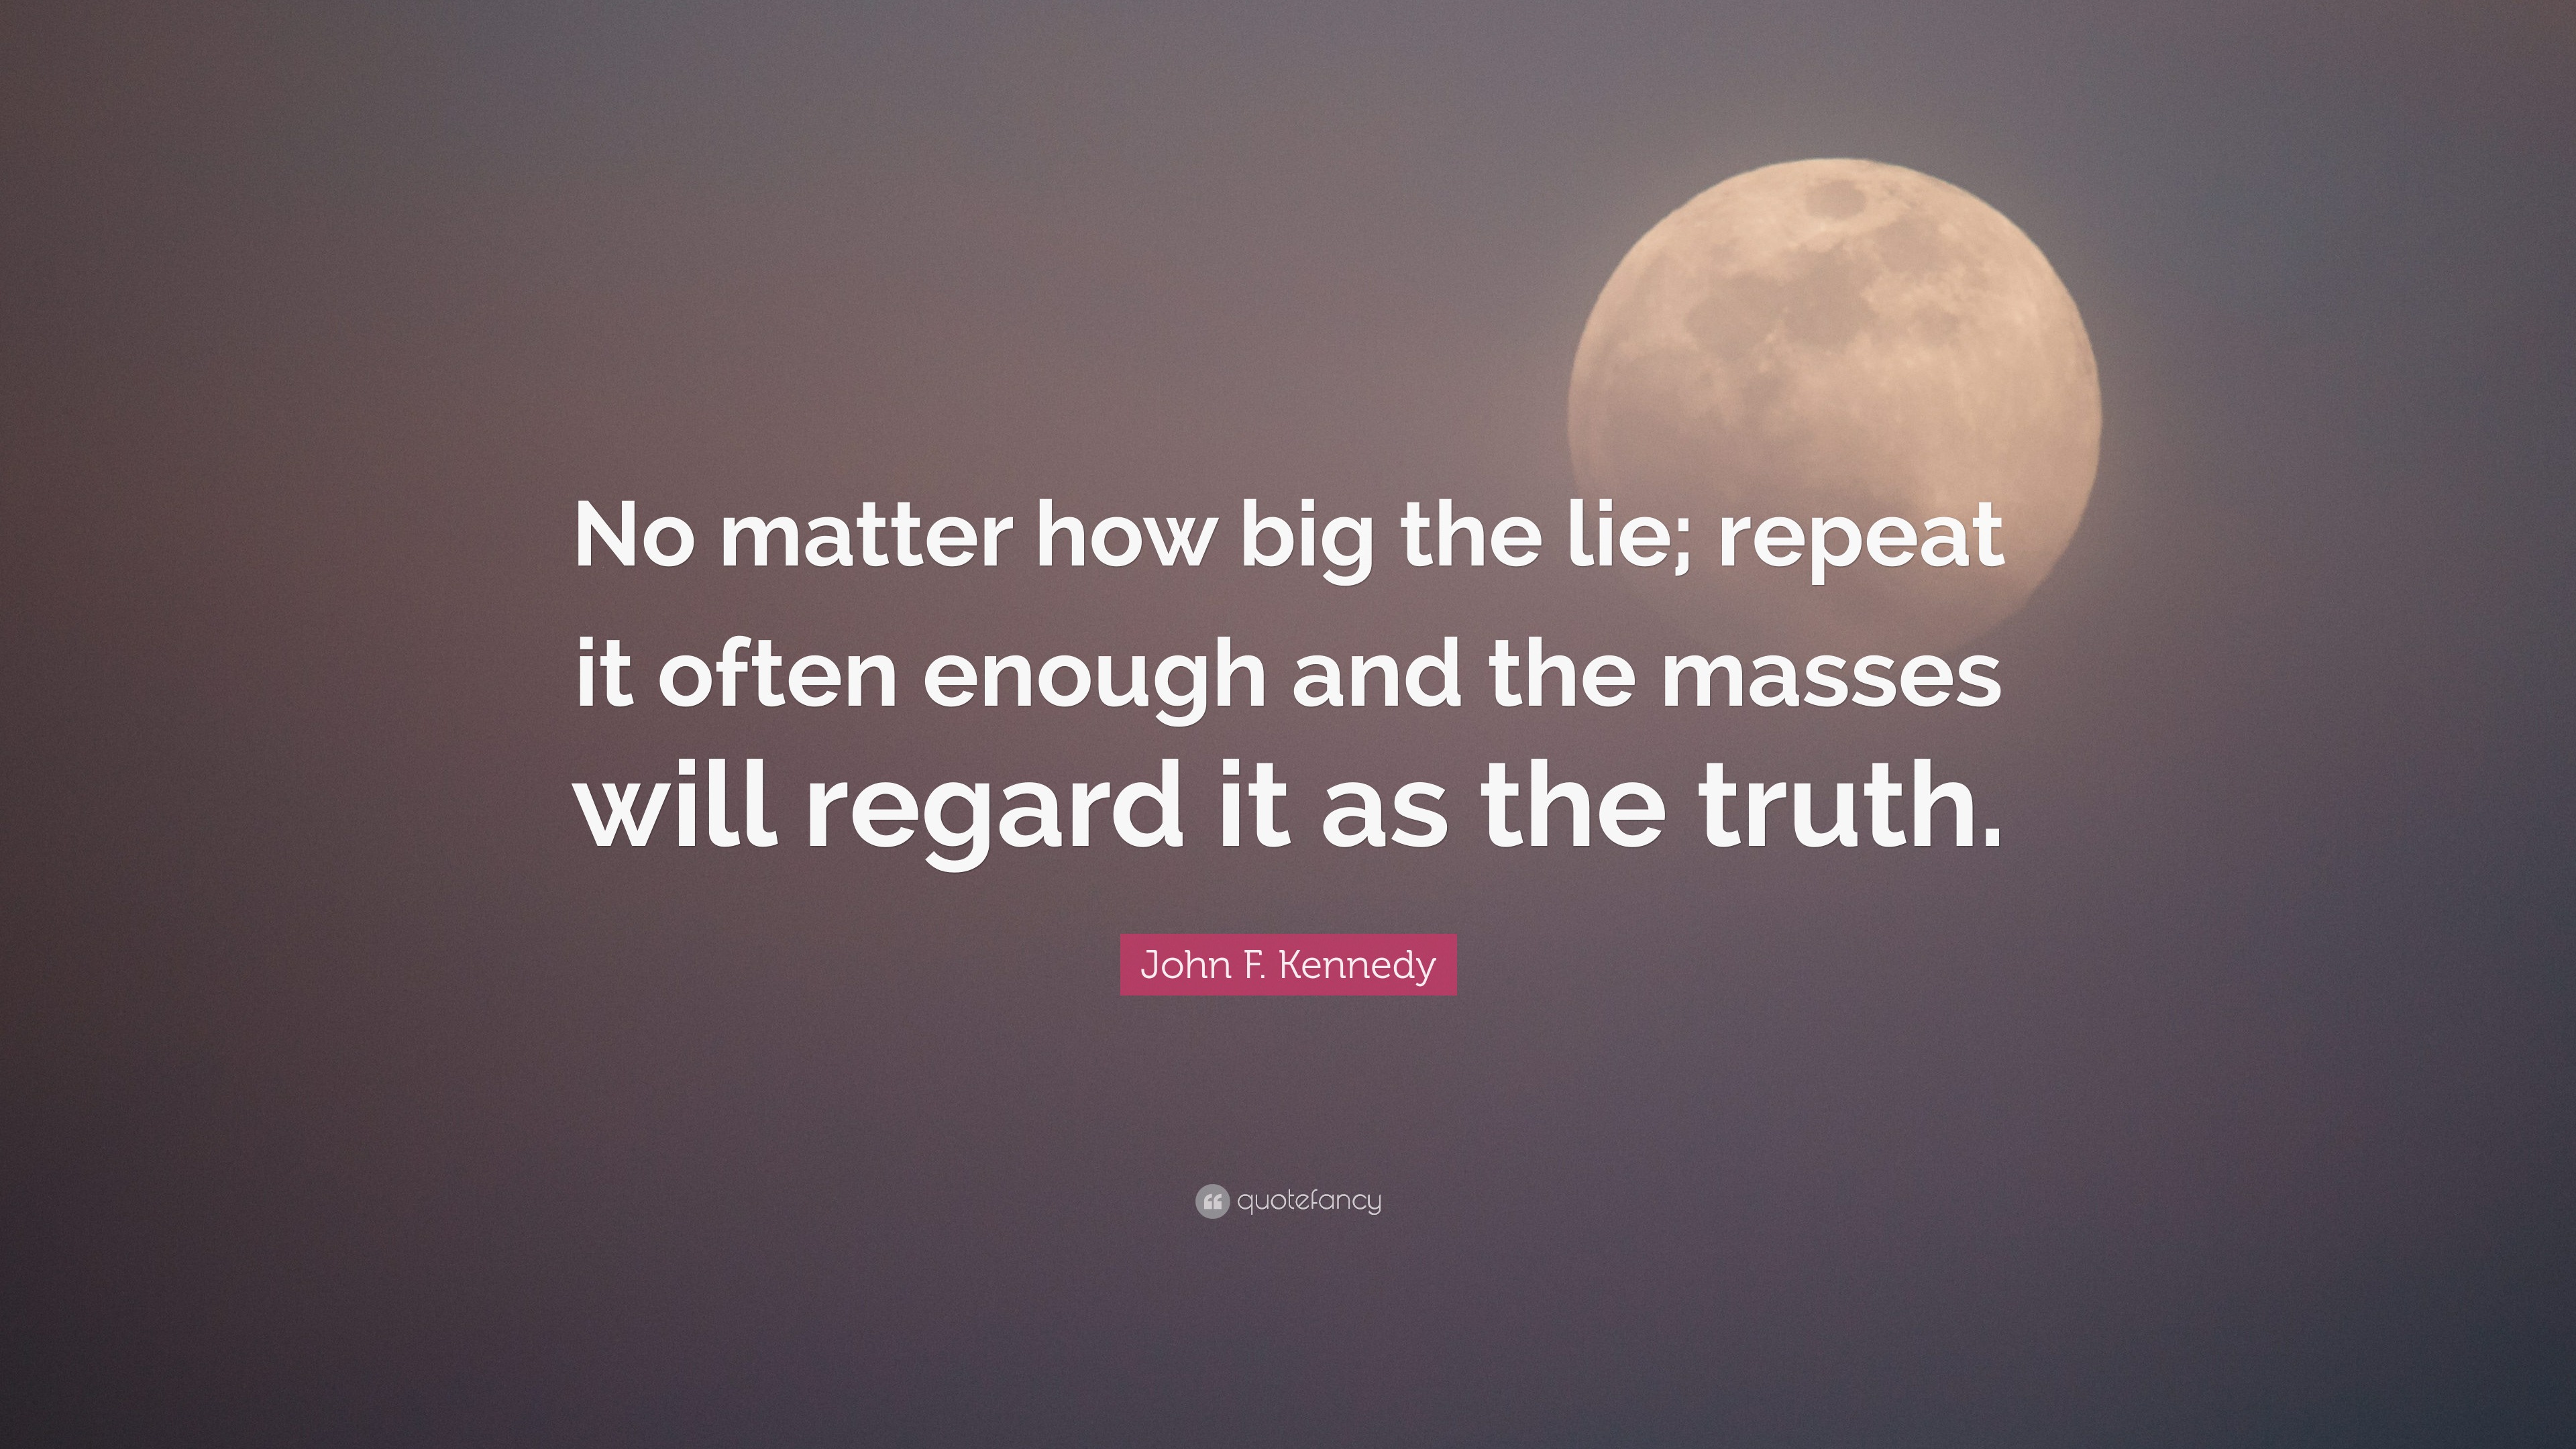 John F. Kennedy Quote: “No matter how big the lie; repeat it often